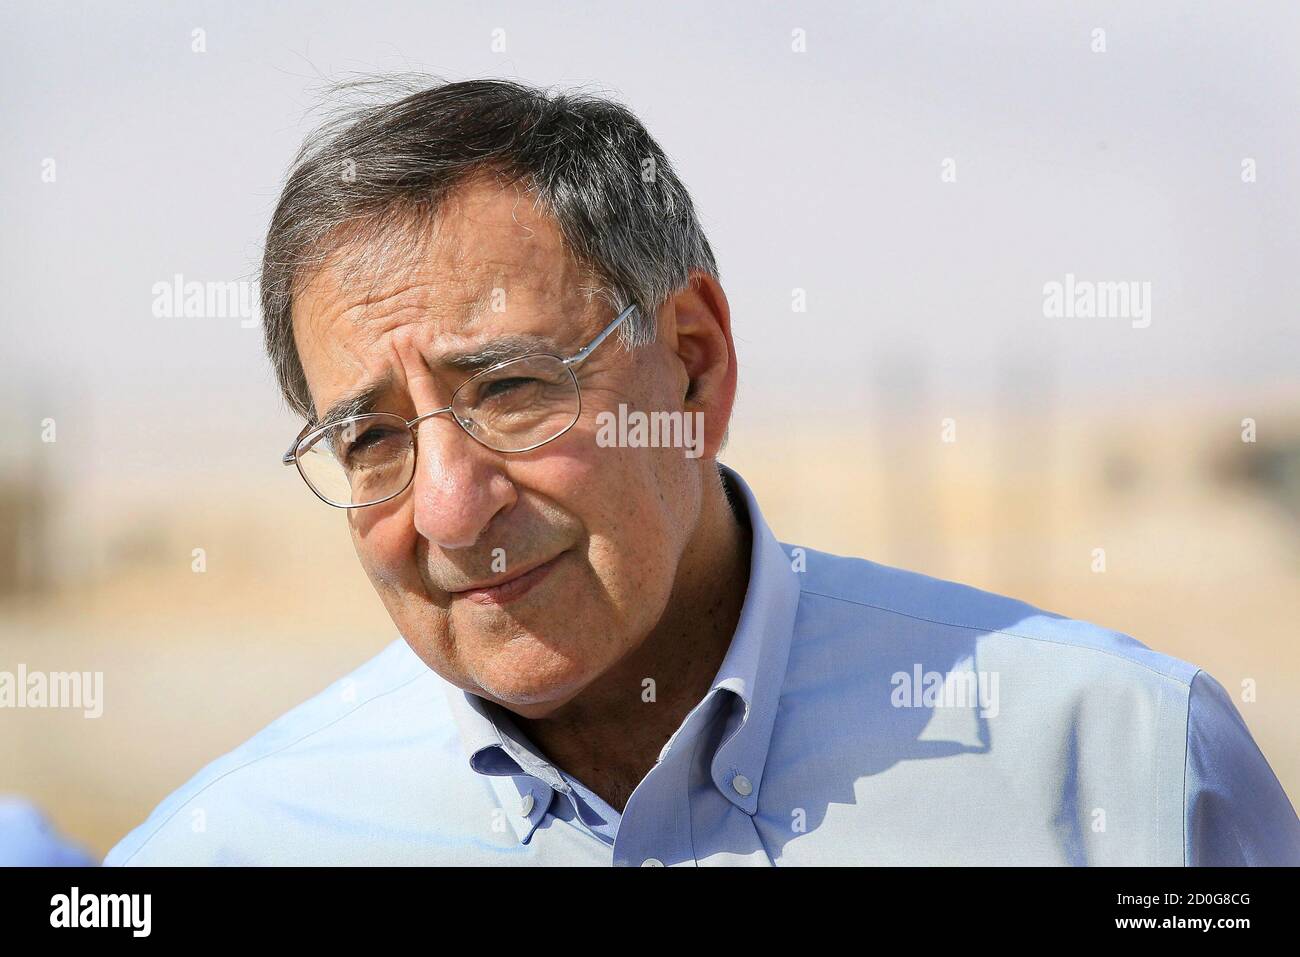 U.S. Defense Secretary Leon Panetta pauses for an interview after visiting with troops from the 31st BN Light Infantry of the Georgian Army at Forward Operating Base Shukvani, Afghanistan March 14, 2012. Panetta told troops in Afghanistan on Wednesday that the massacre of 16 Afghan civilians by an American soldier should not deter them from their mission to secure the country ahead of a 2014 NATO withdrawal deadline.  REUTERS/Scott Olson/Pool  (AFGHANISTAN - Tags: POLITICS MILITARY) Stock Photo